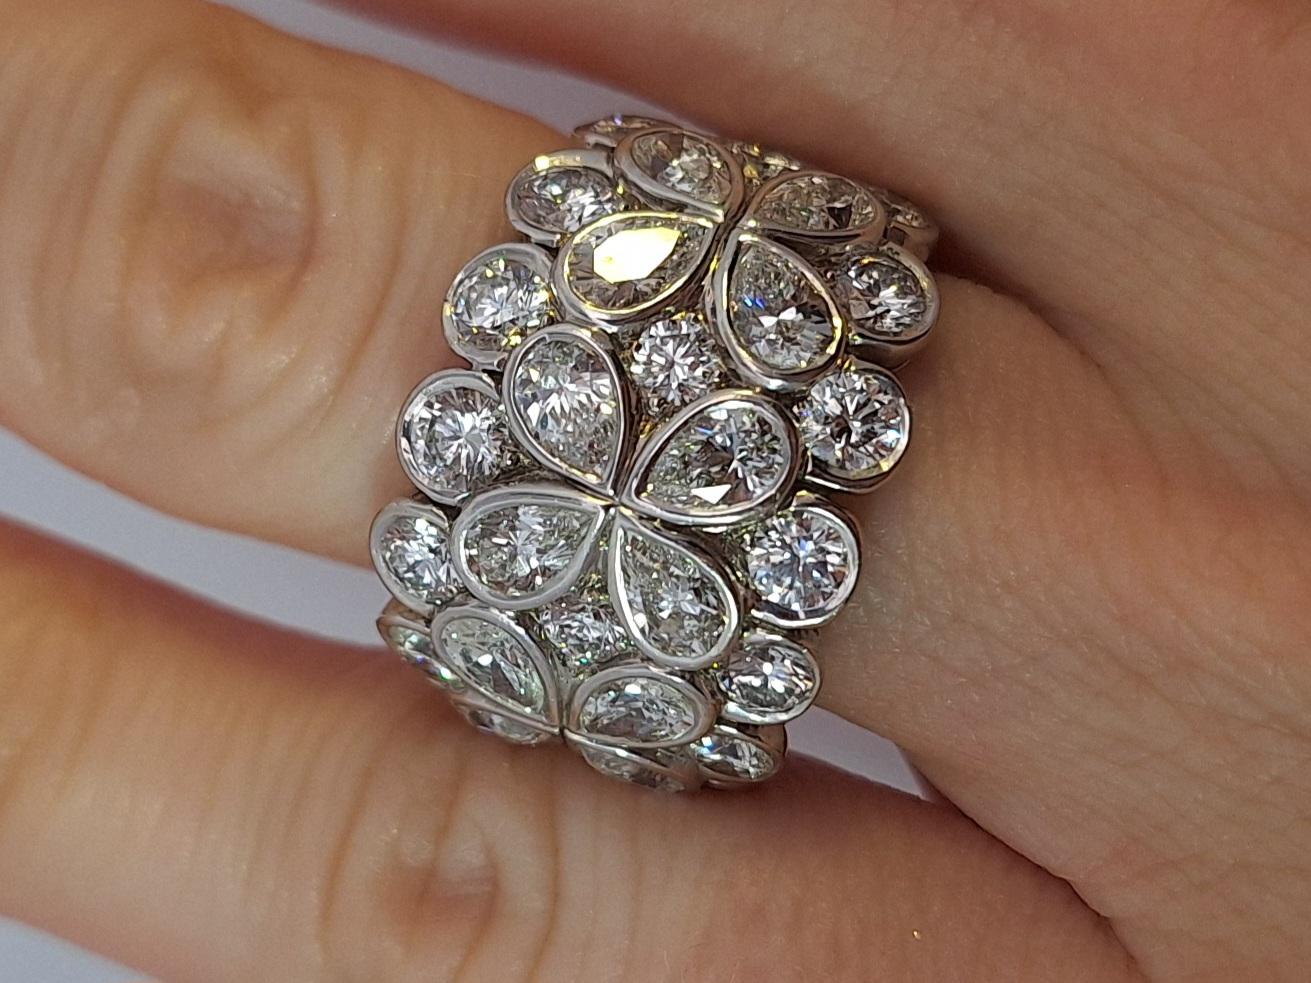 The ring is 18K White Gold. There are 4.25ct in Diamonds F VVS. The ring has French Maker Marks on the outside of the ring. The ring comes with Certificate of Authenticity. The ring is a size 6.5, can be sized sizable. The ring weighs 12.3 grams.